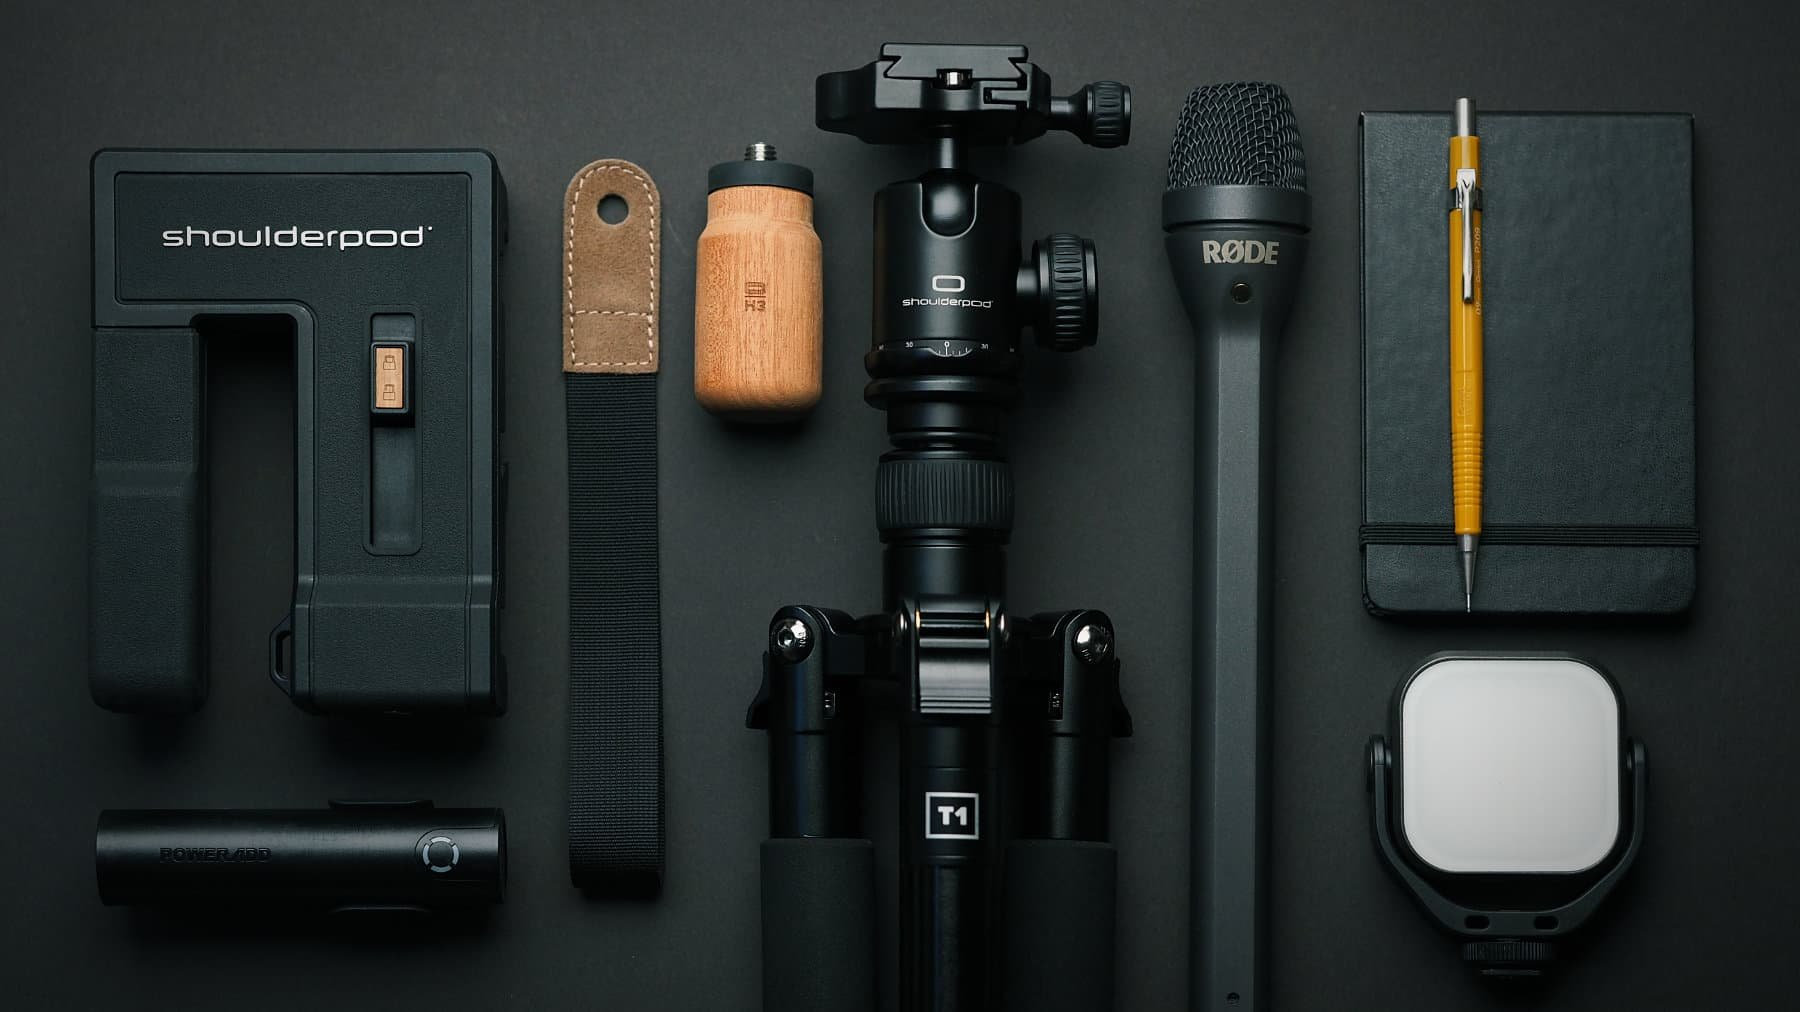 DJI Osmo Action 3 features vertical shooting as an option by Jose Antunes -  ProVideo Coalition